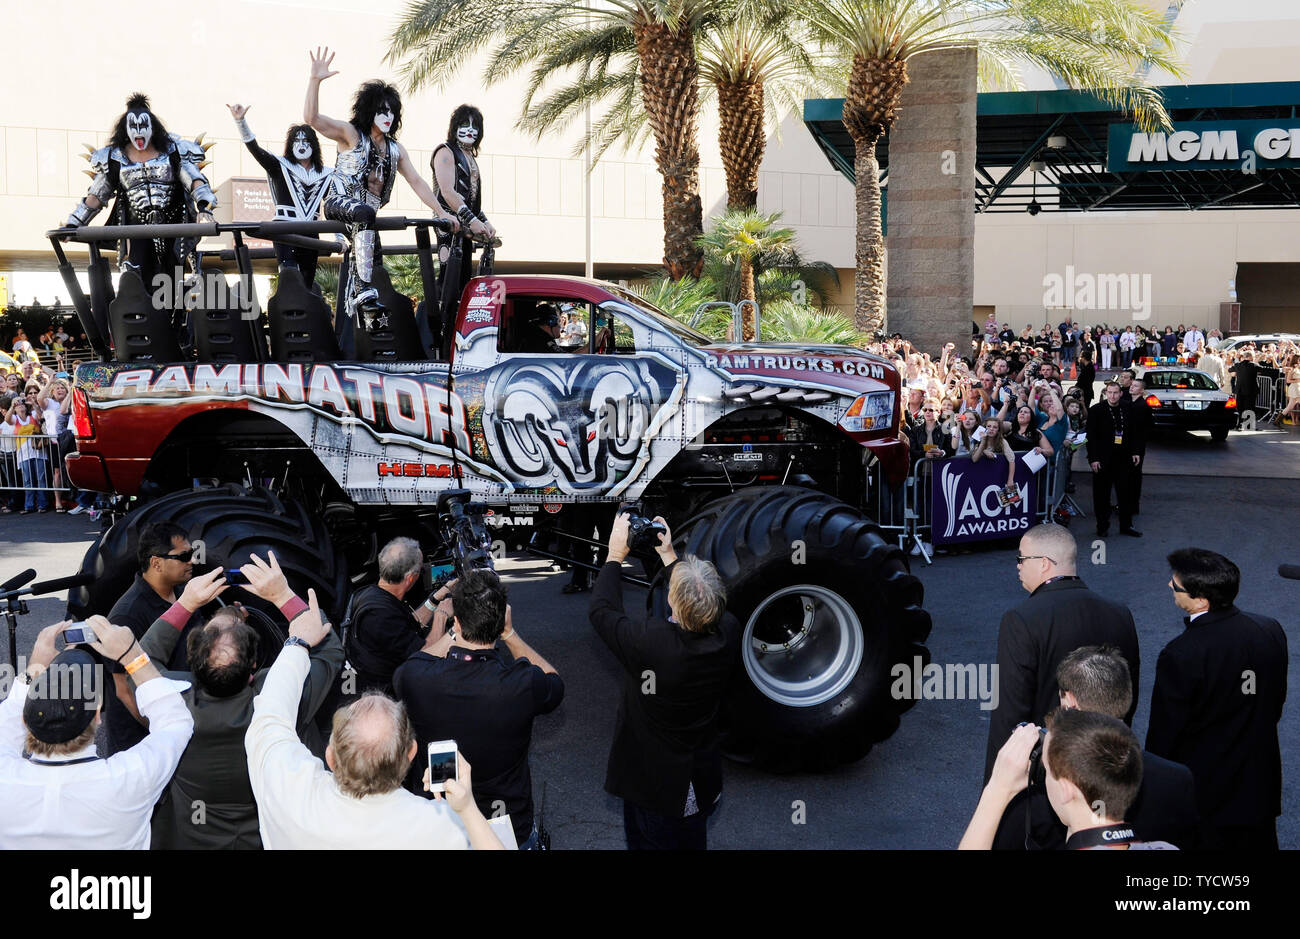 (L-R) Musicians Gene Simmons, Tommy Thayer, Paul Stanley and Eric Singer of the band KISS arrive at the 47th annual Academy of Country Music Awards at the MGM Hotel in Las Vegas, Nevada on April 1, 2012.  UPI/David Becker Stock Photo